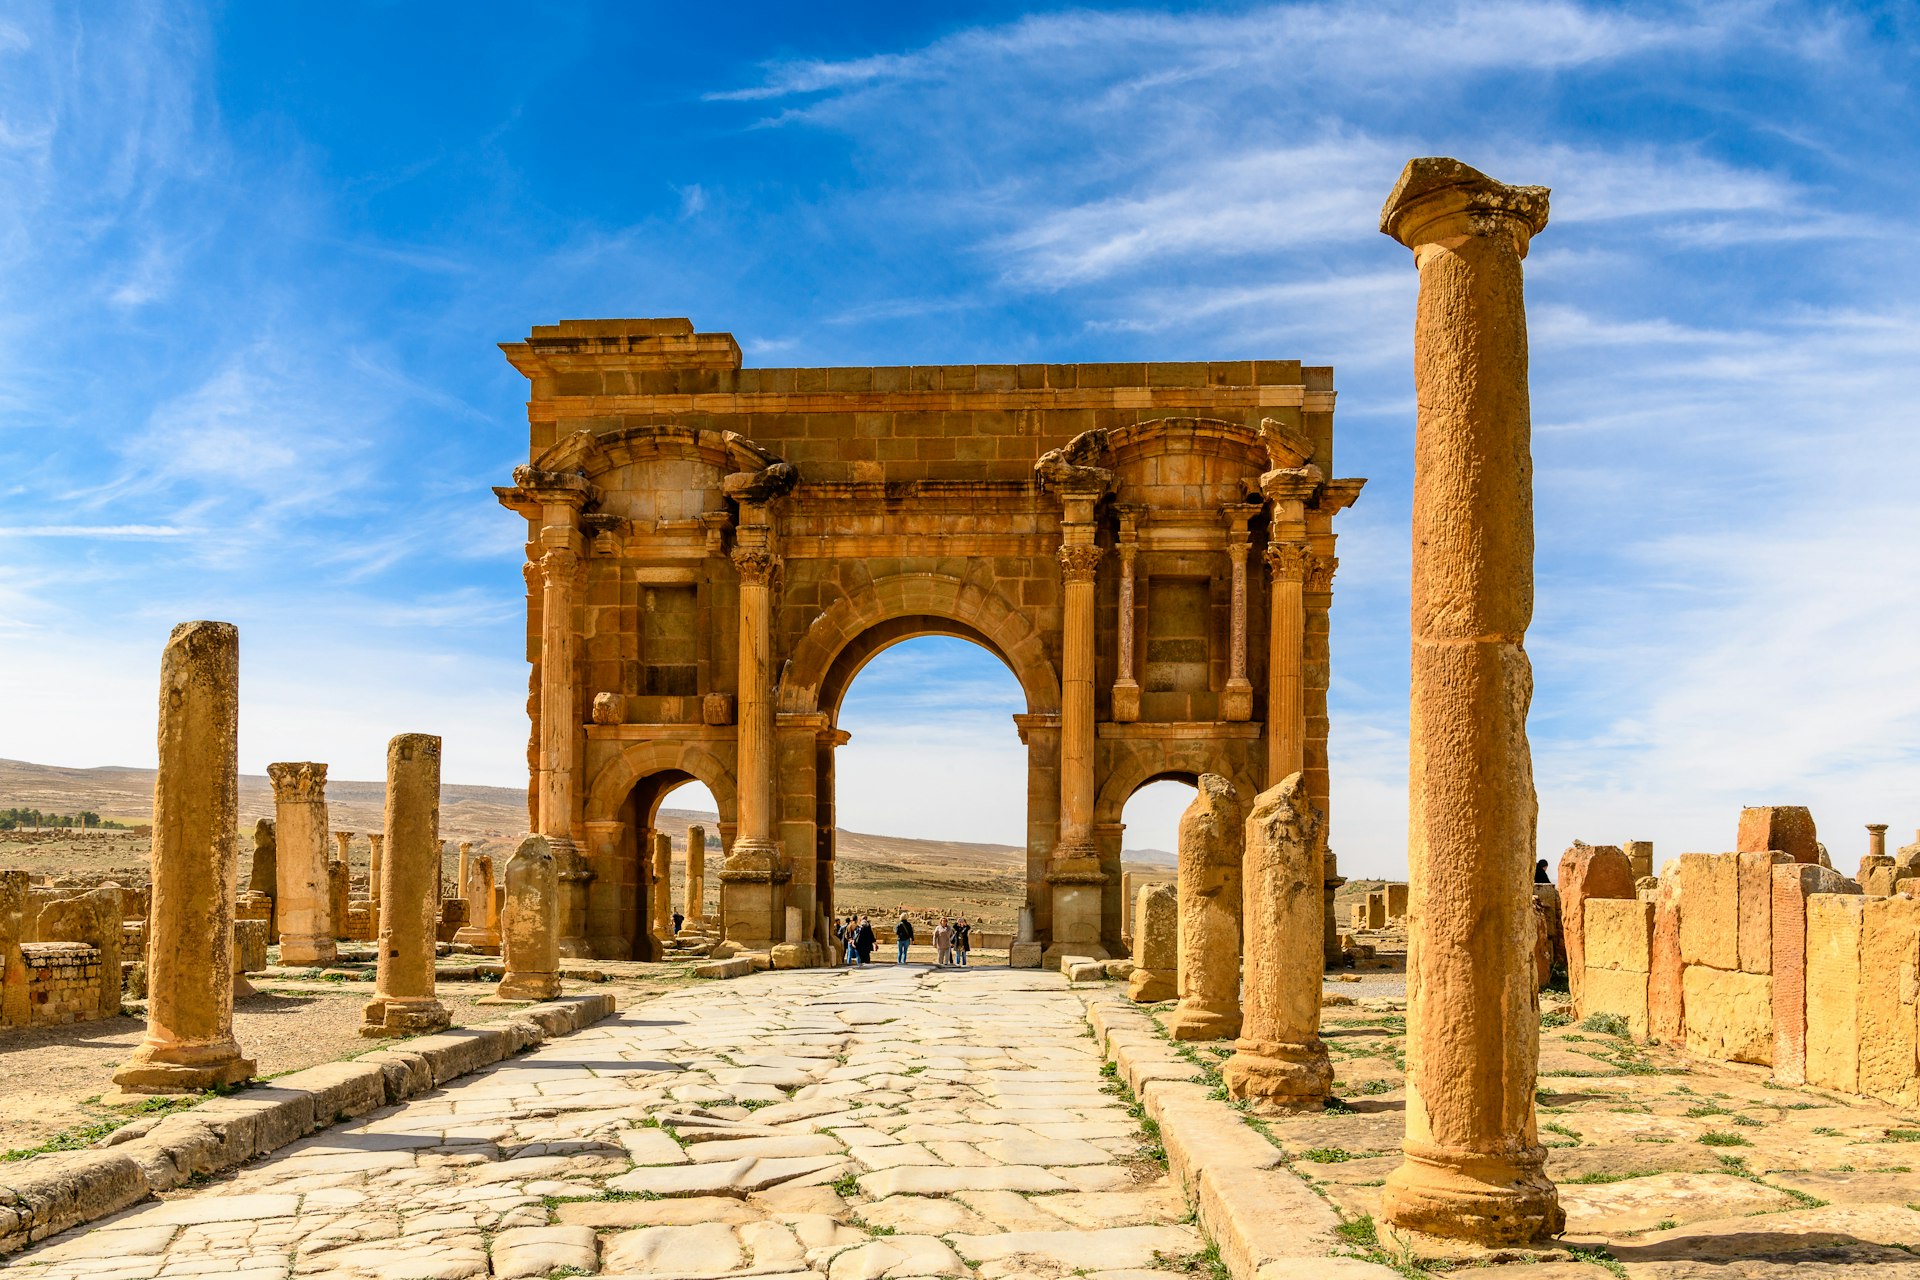 Trajan's Arch of Timgad, a Roman-Berber city in the Aures Mountains of Algeria. UNESCO World Heritage Site